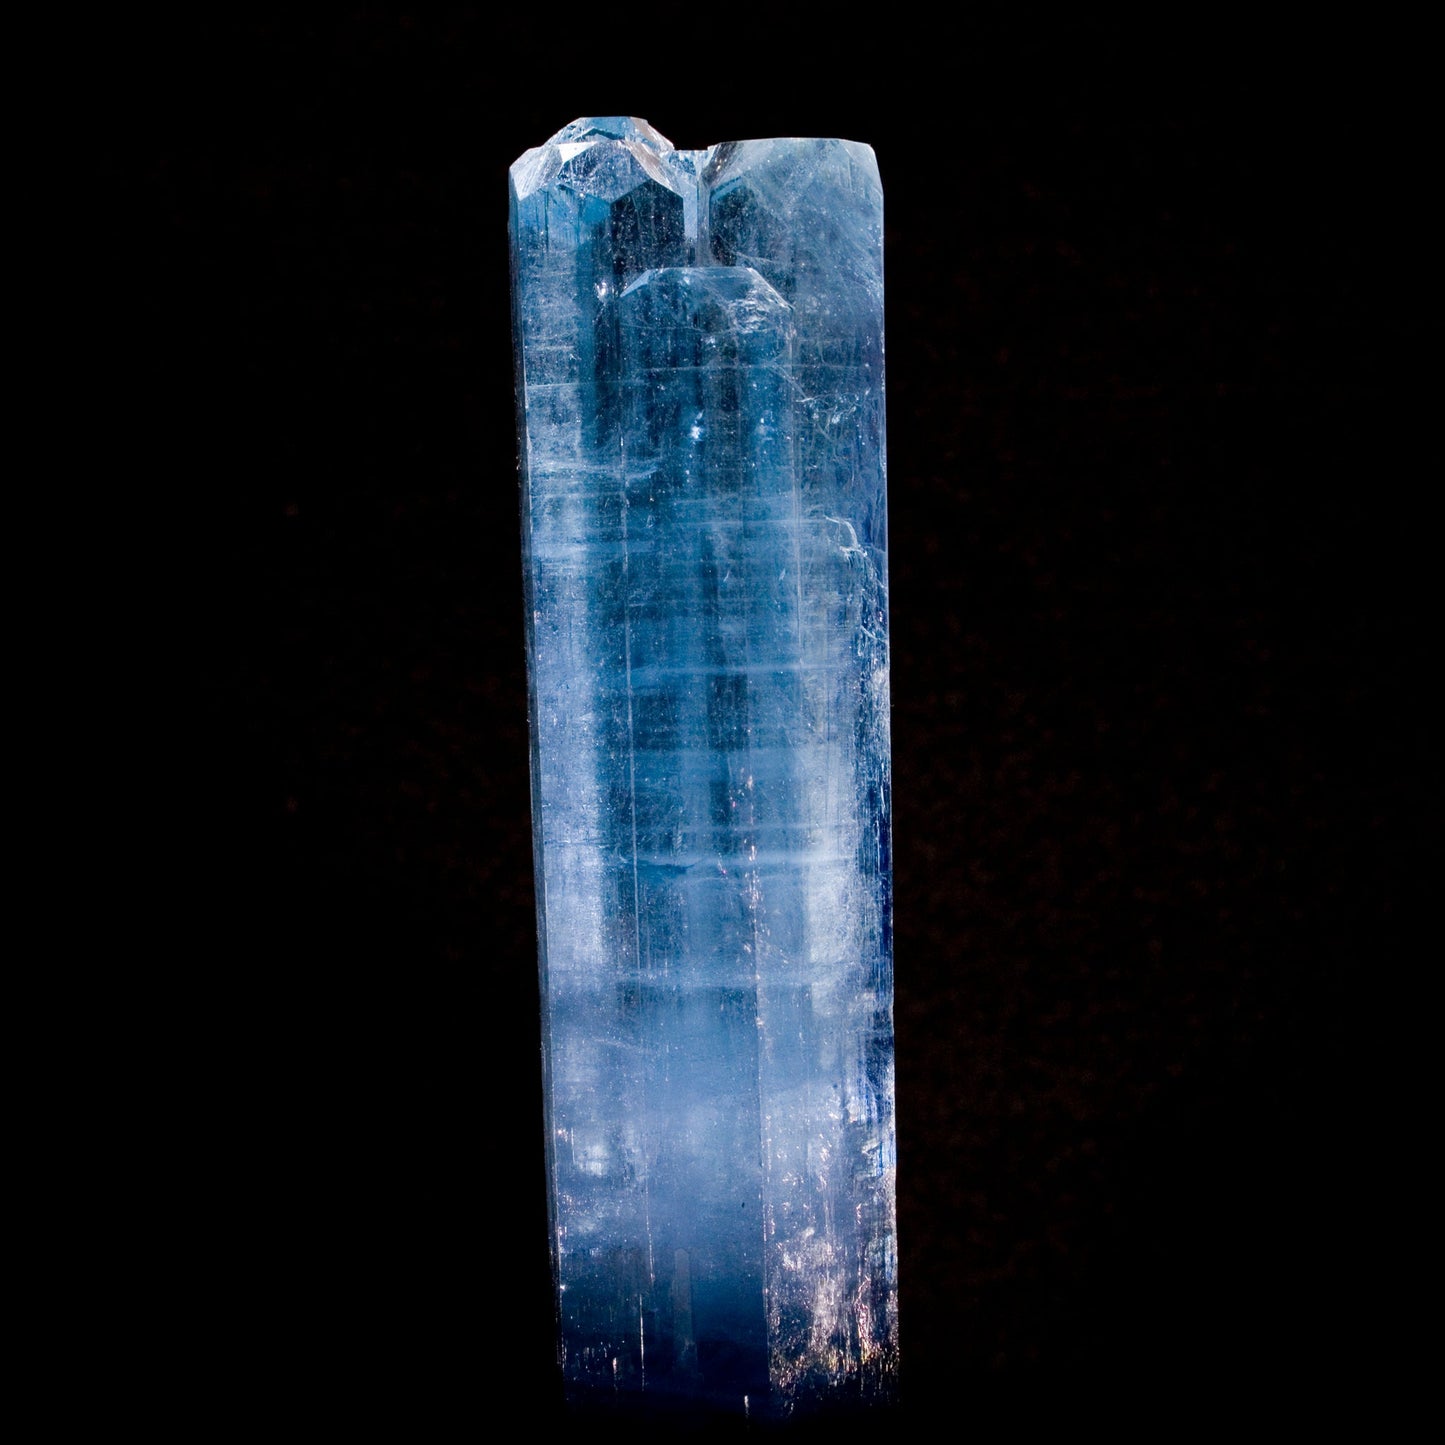 Aquamarine: Brilliant blue color with multiple terminations at the top sits in high contrast on black background. From Vietnam. All natural smooth, lustrous edges.